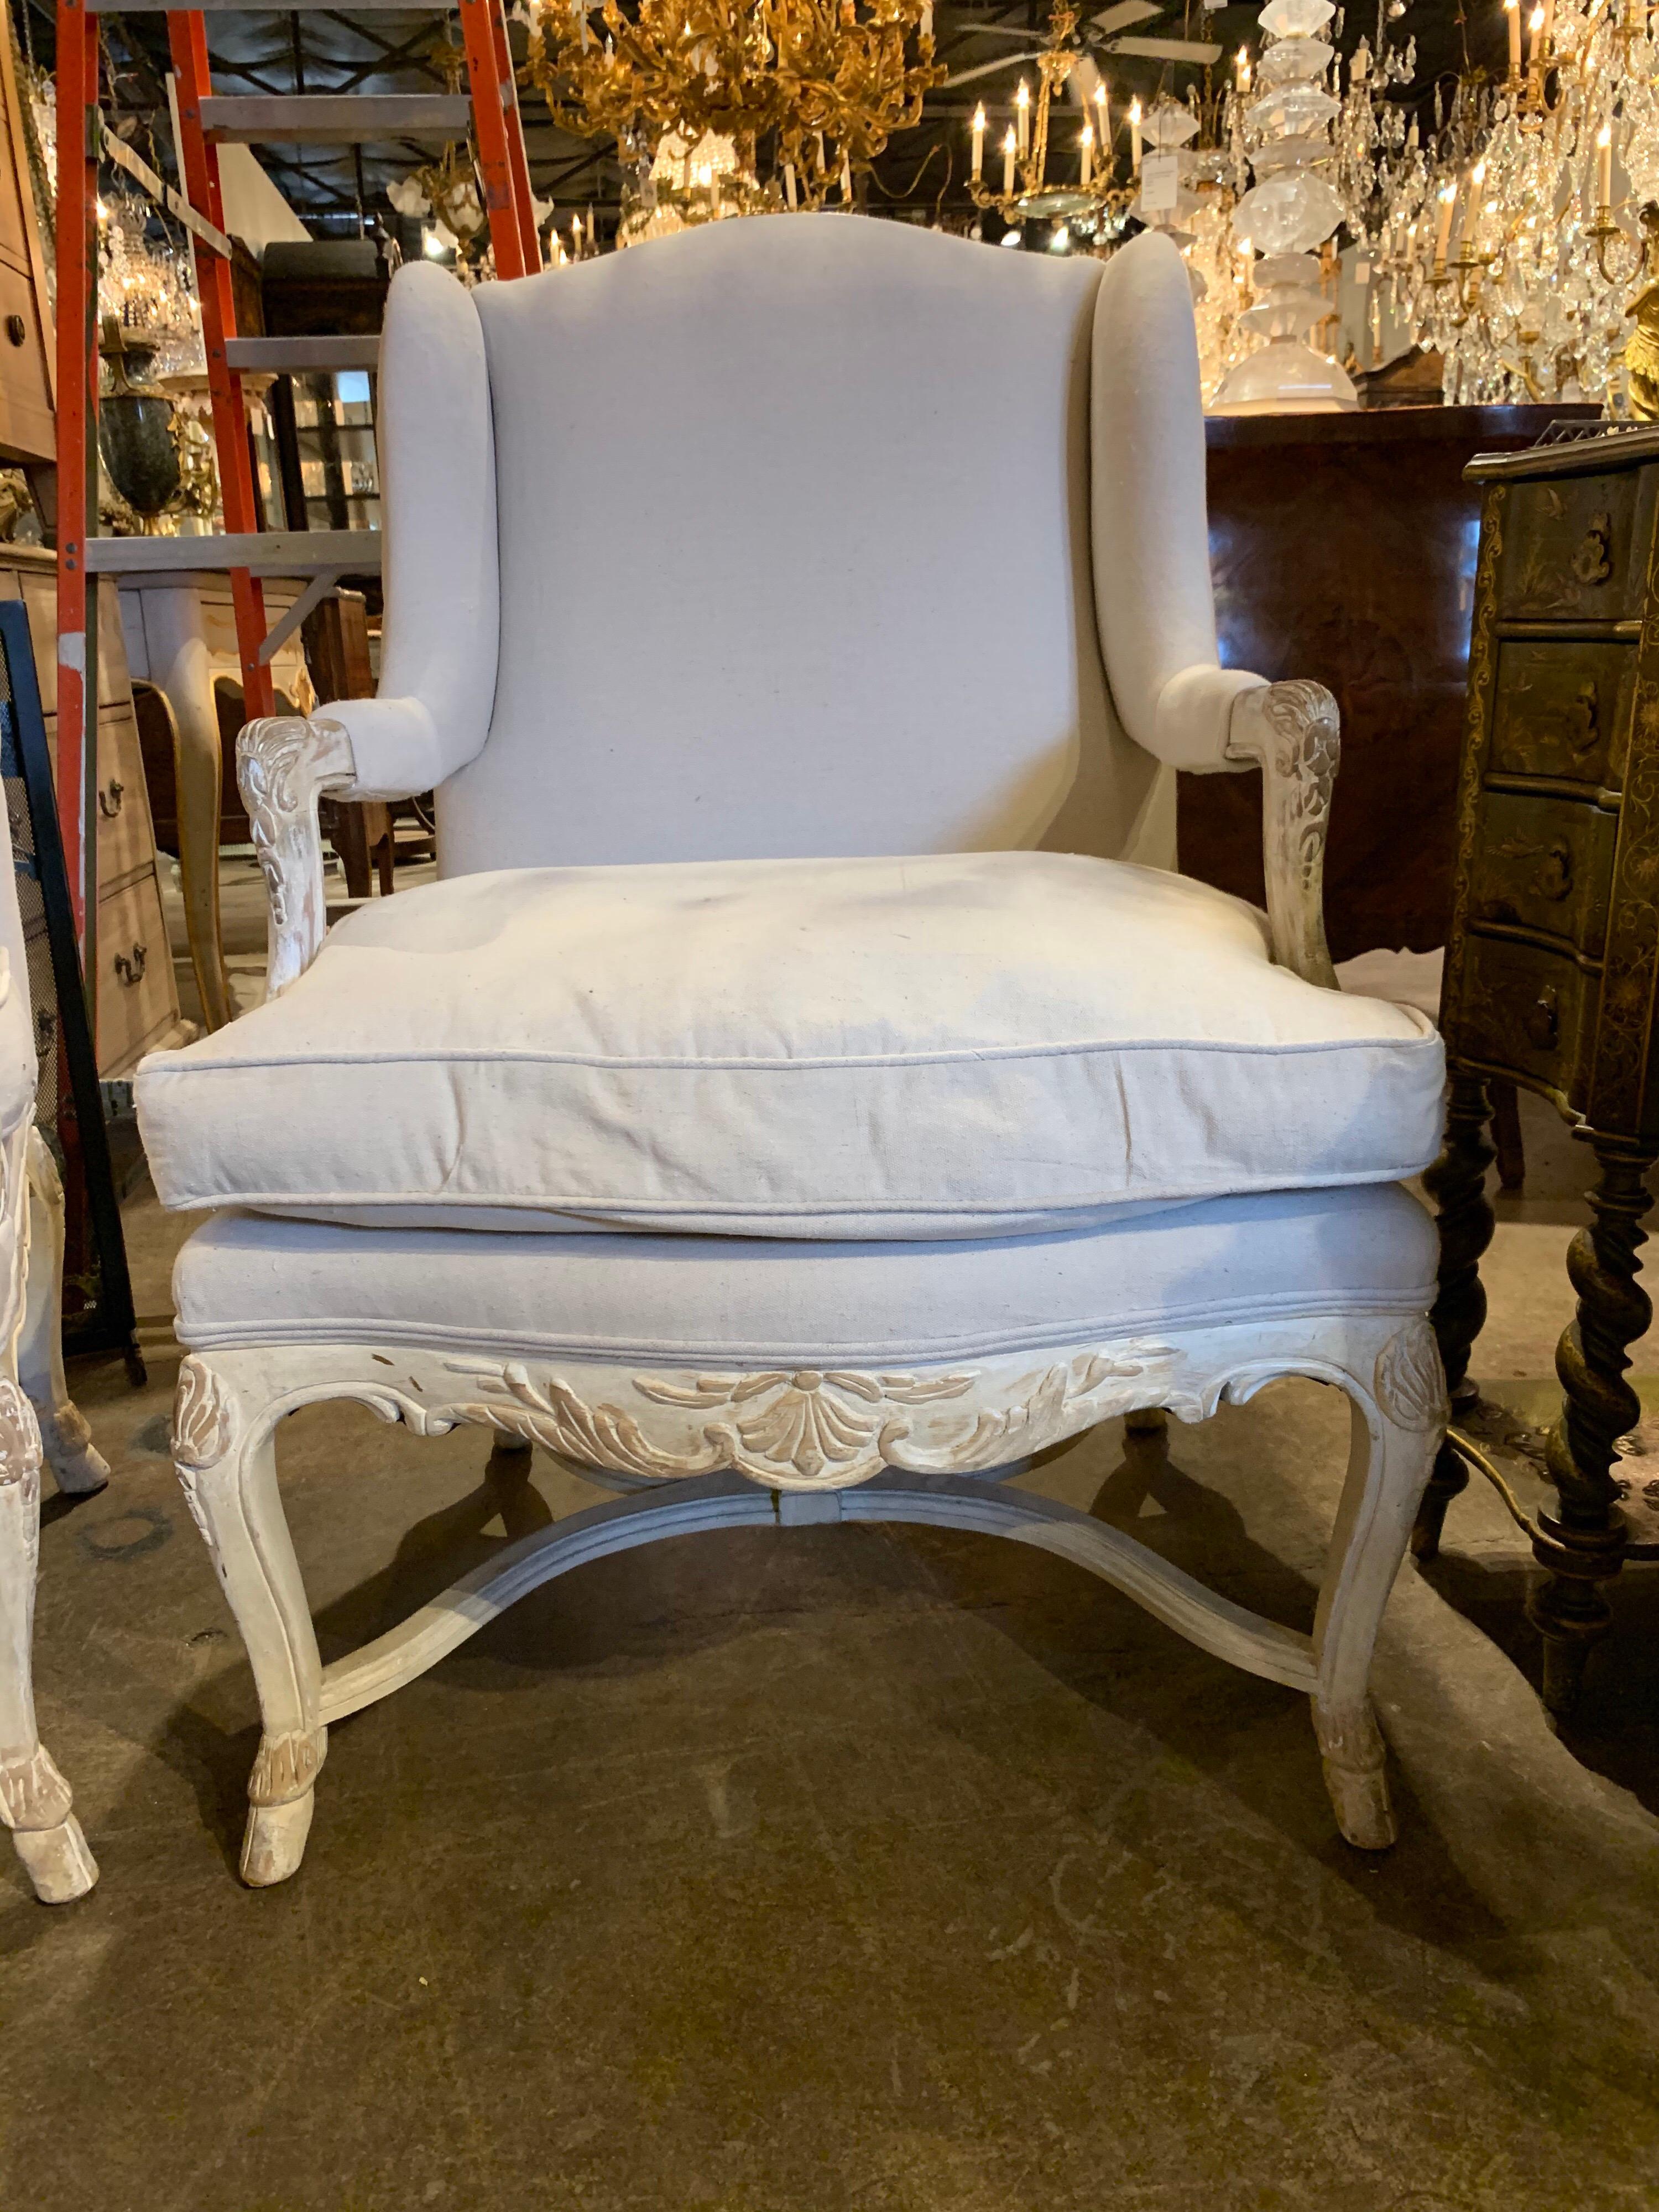 Gorgeous pair of Italian carved and white washed Bergères upholstered in a beige colored linen. These chairs are so pretty and amazingly comfortable too. A fine addition to any home!